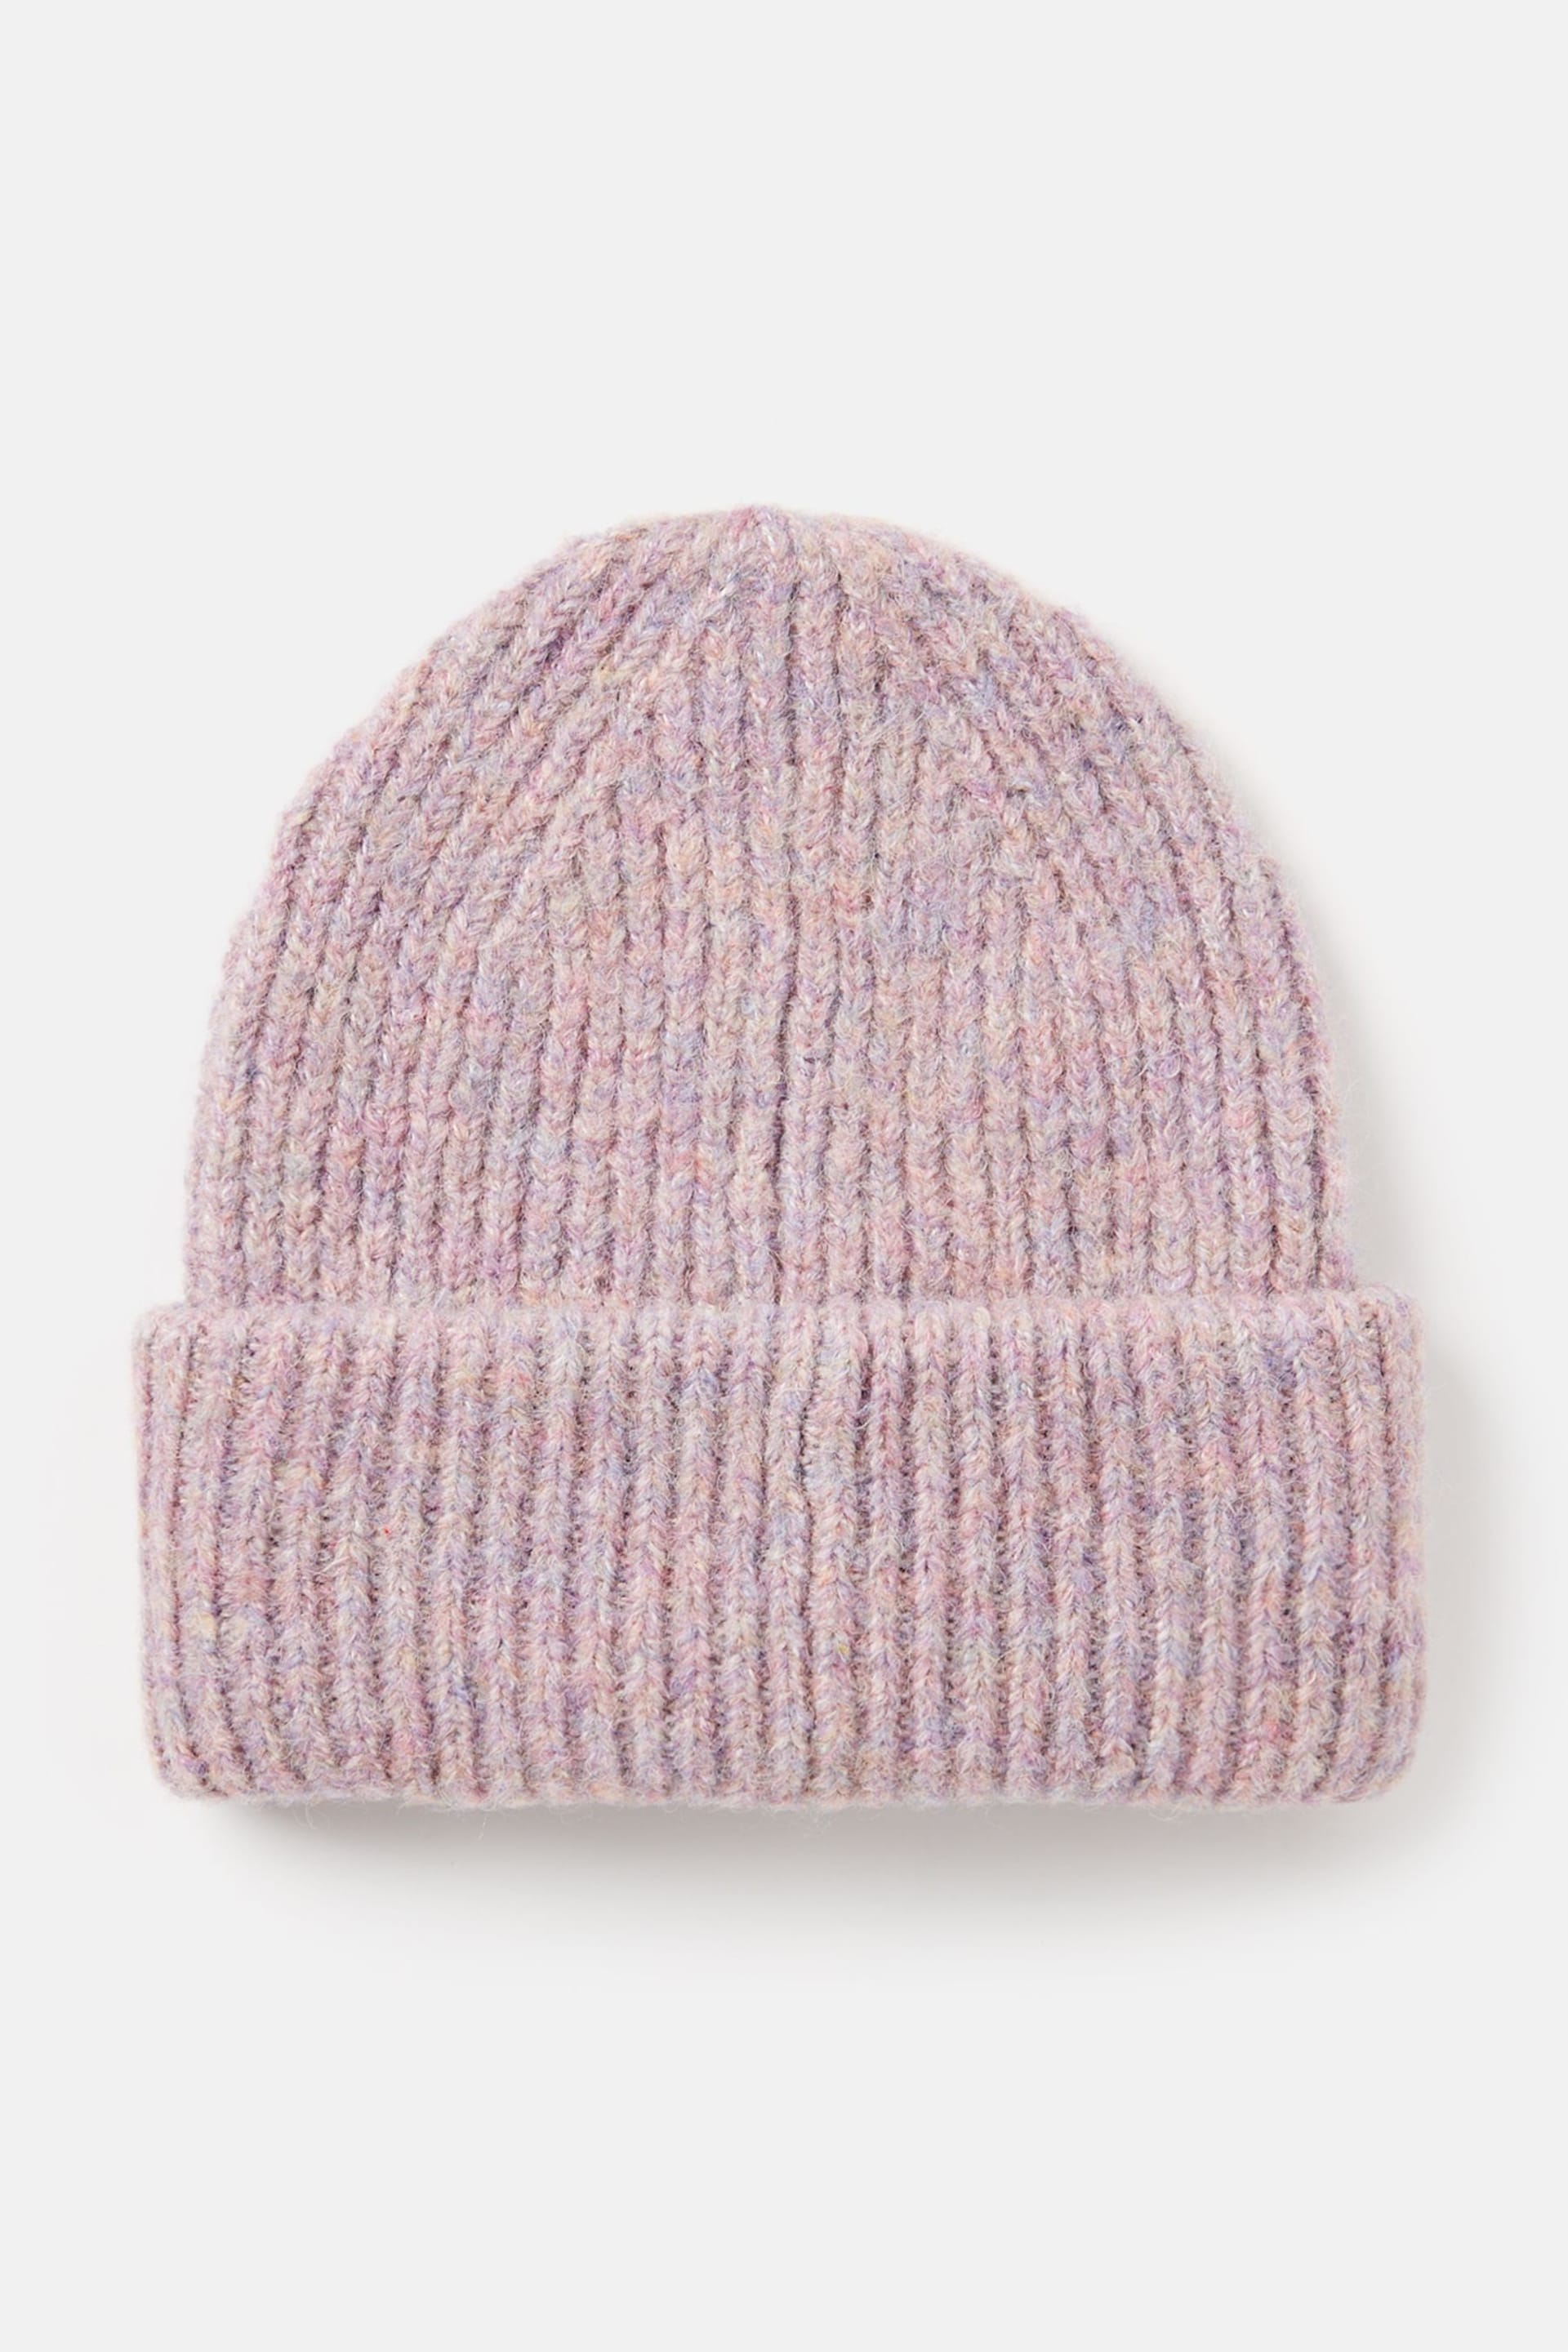 Joules Eloise Lilac Oversized Knitted Beanie Hat - Image 4 of 5